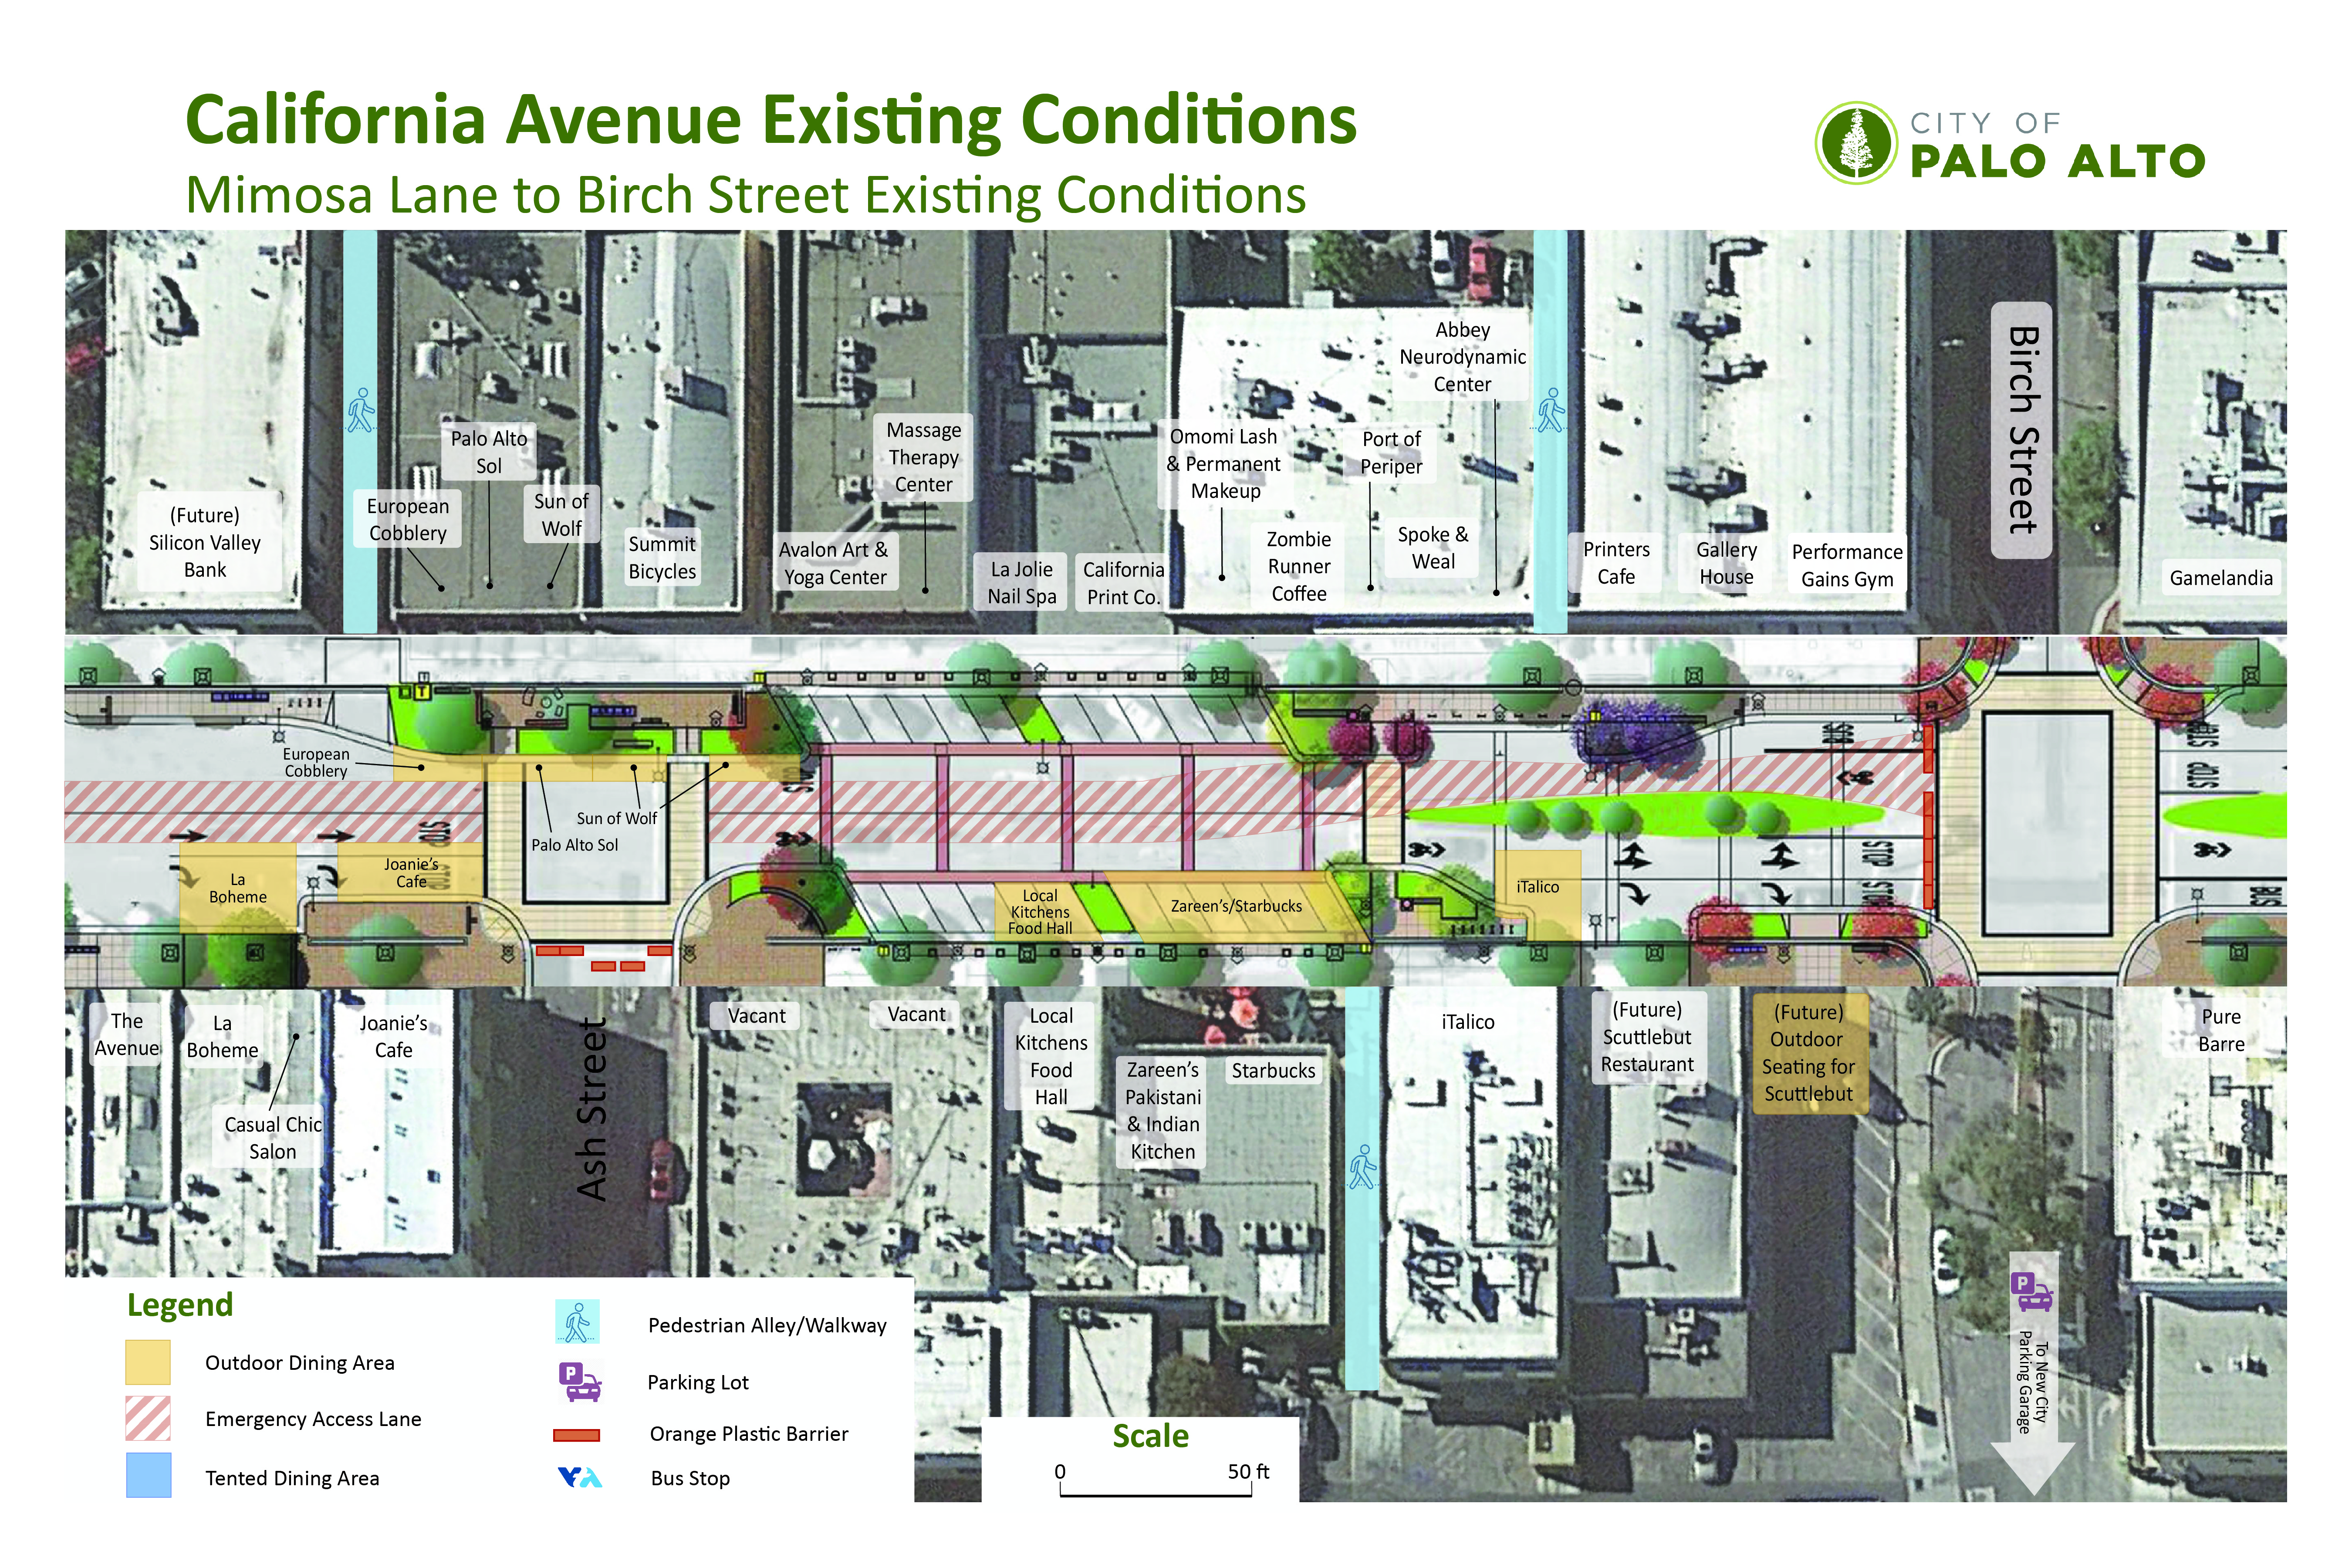 Cal Ave Existing Conditions Mimosa Lane to Birch Street